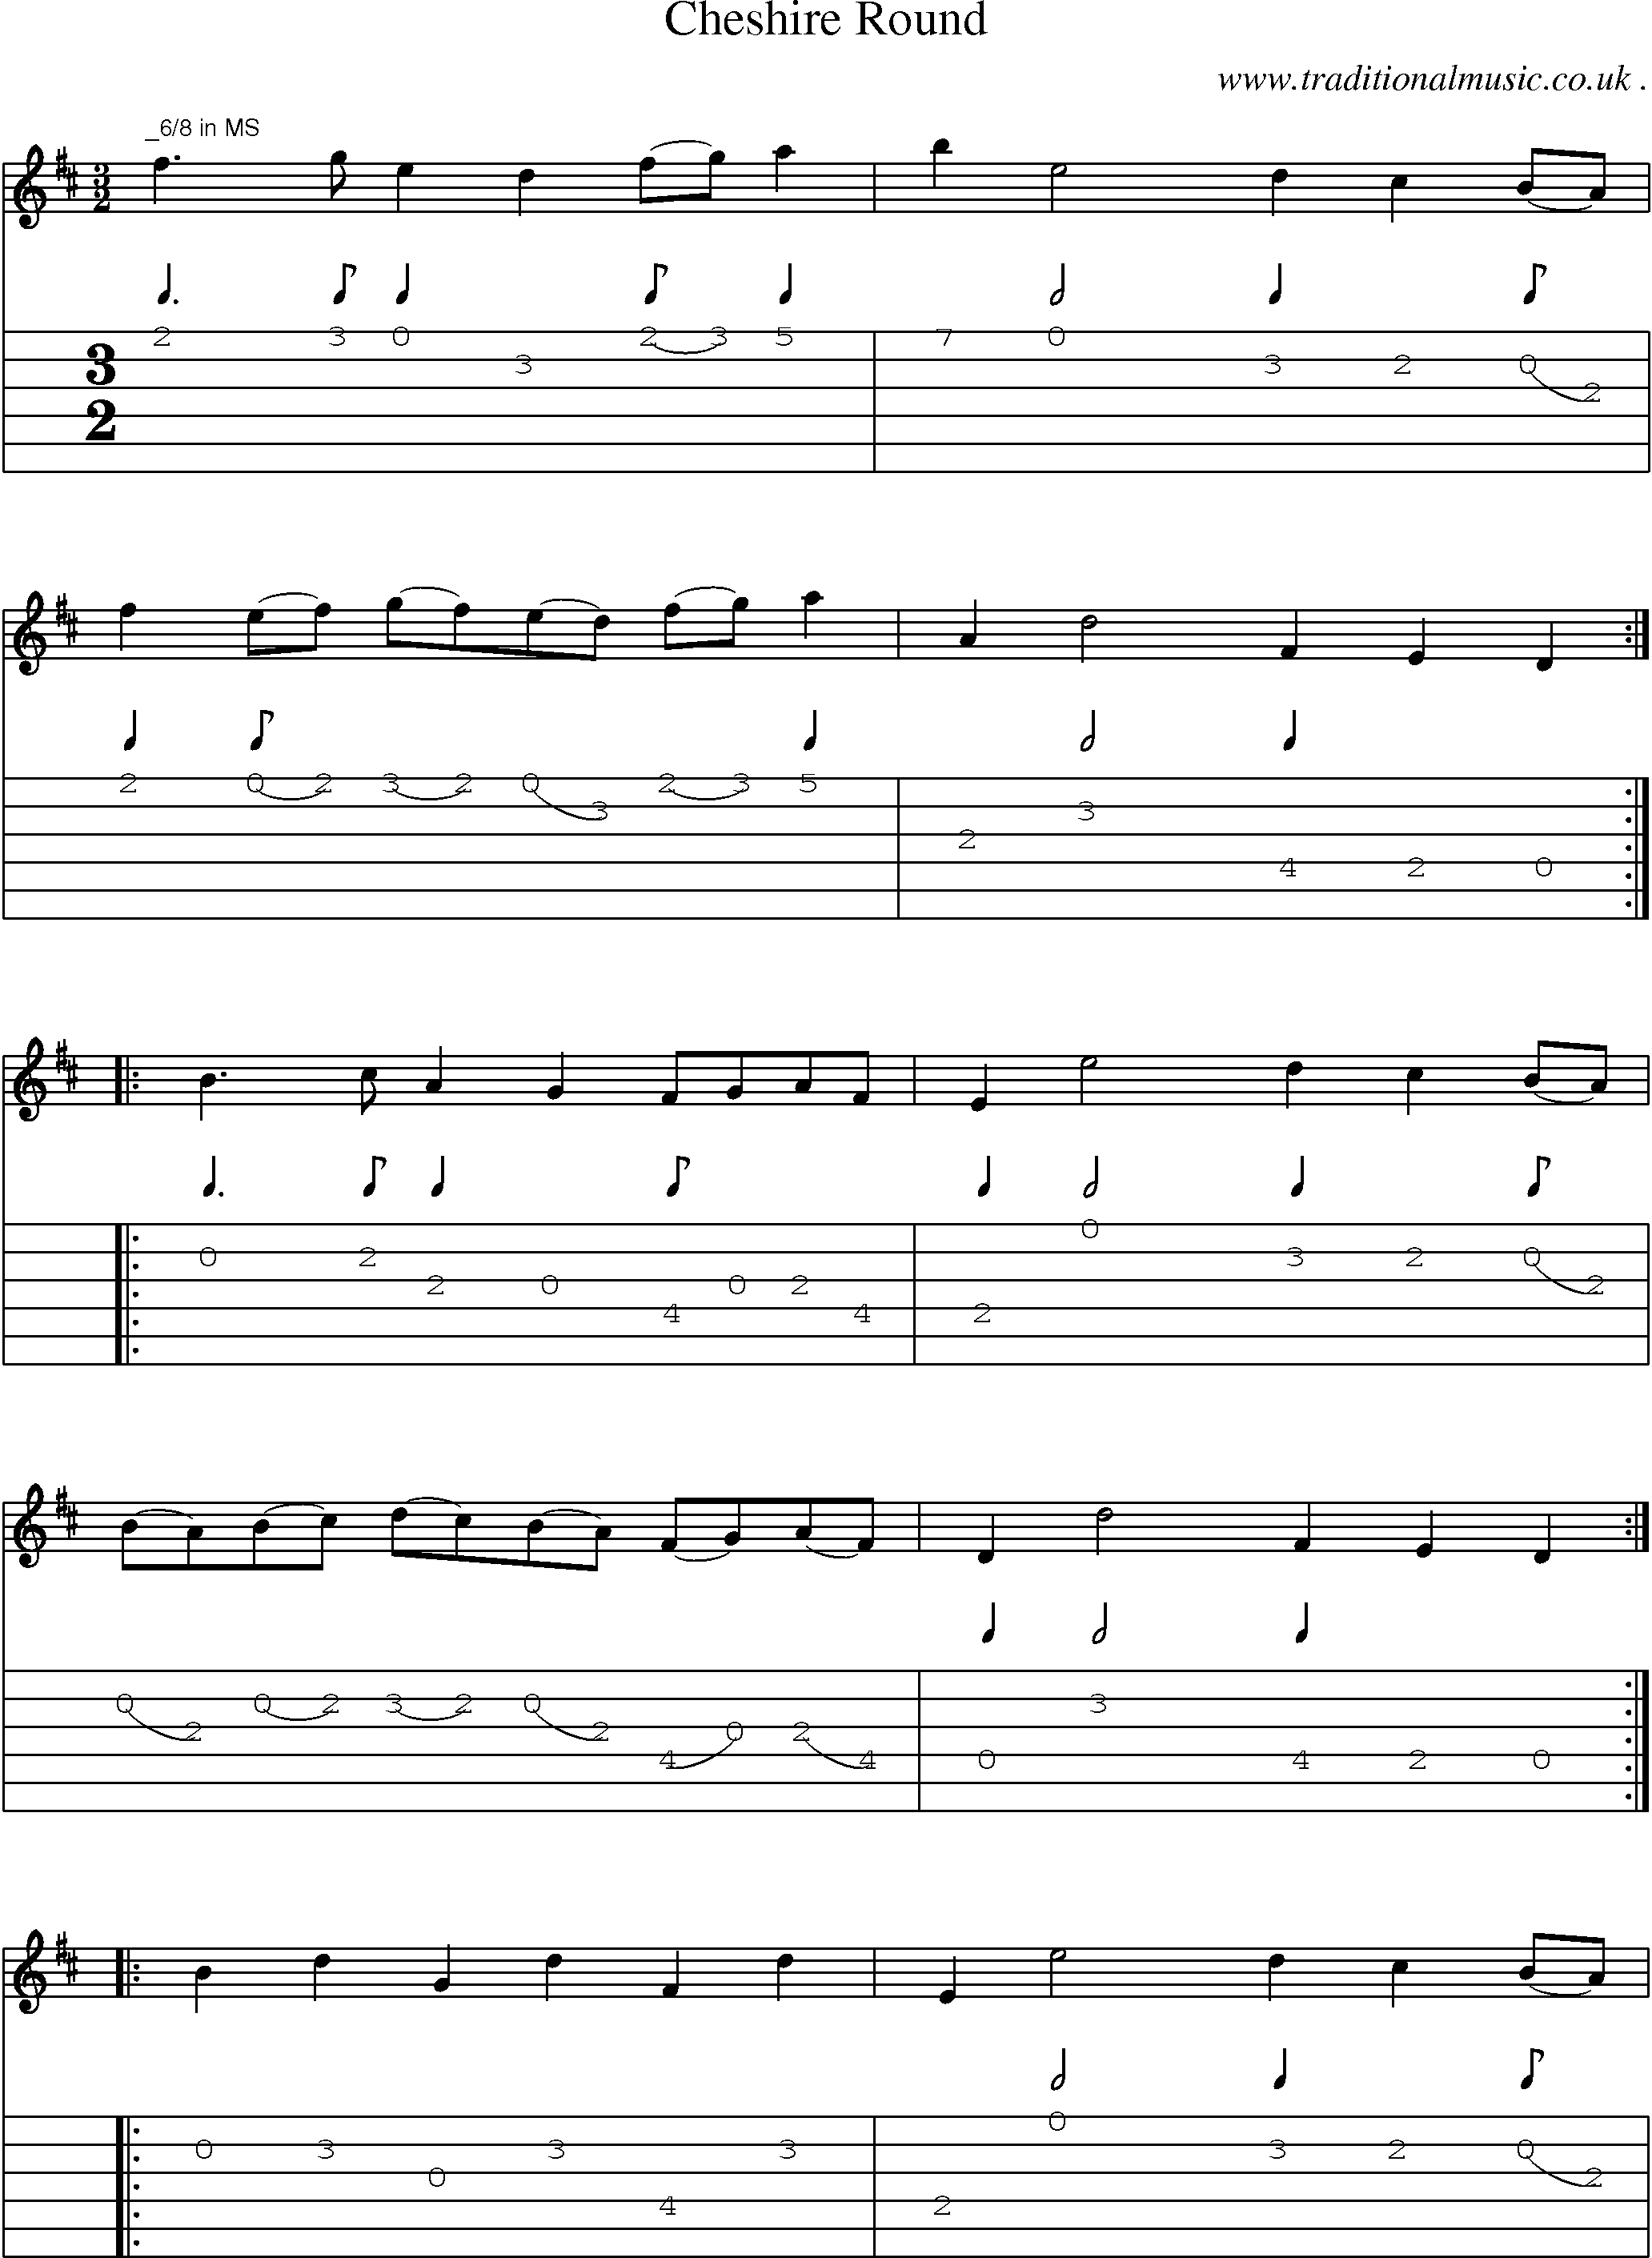 Sheet-Music and Guitar Tabs for Cheshire Round